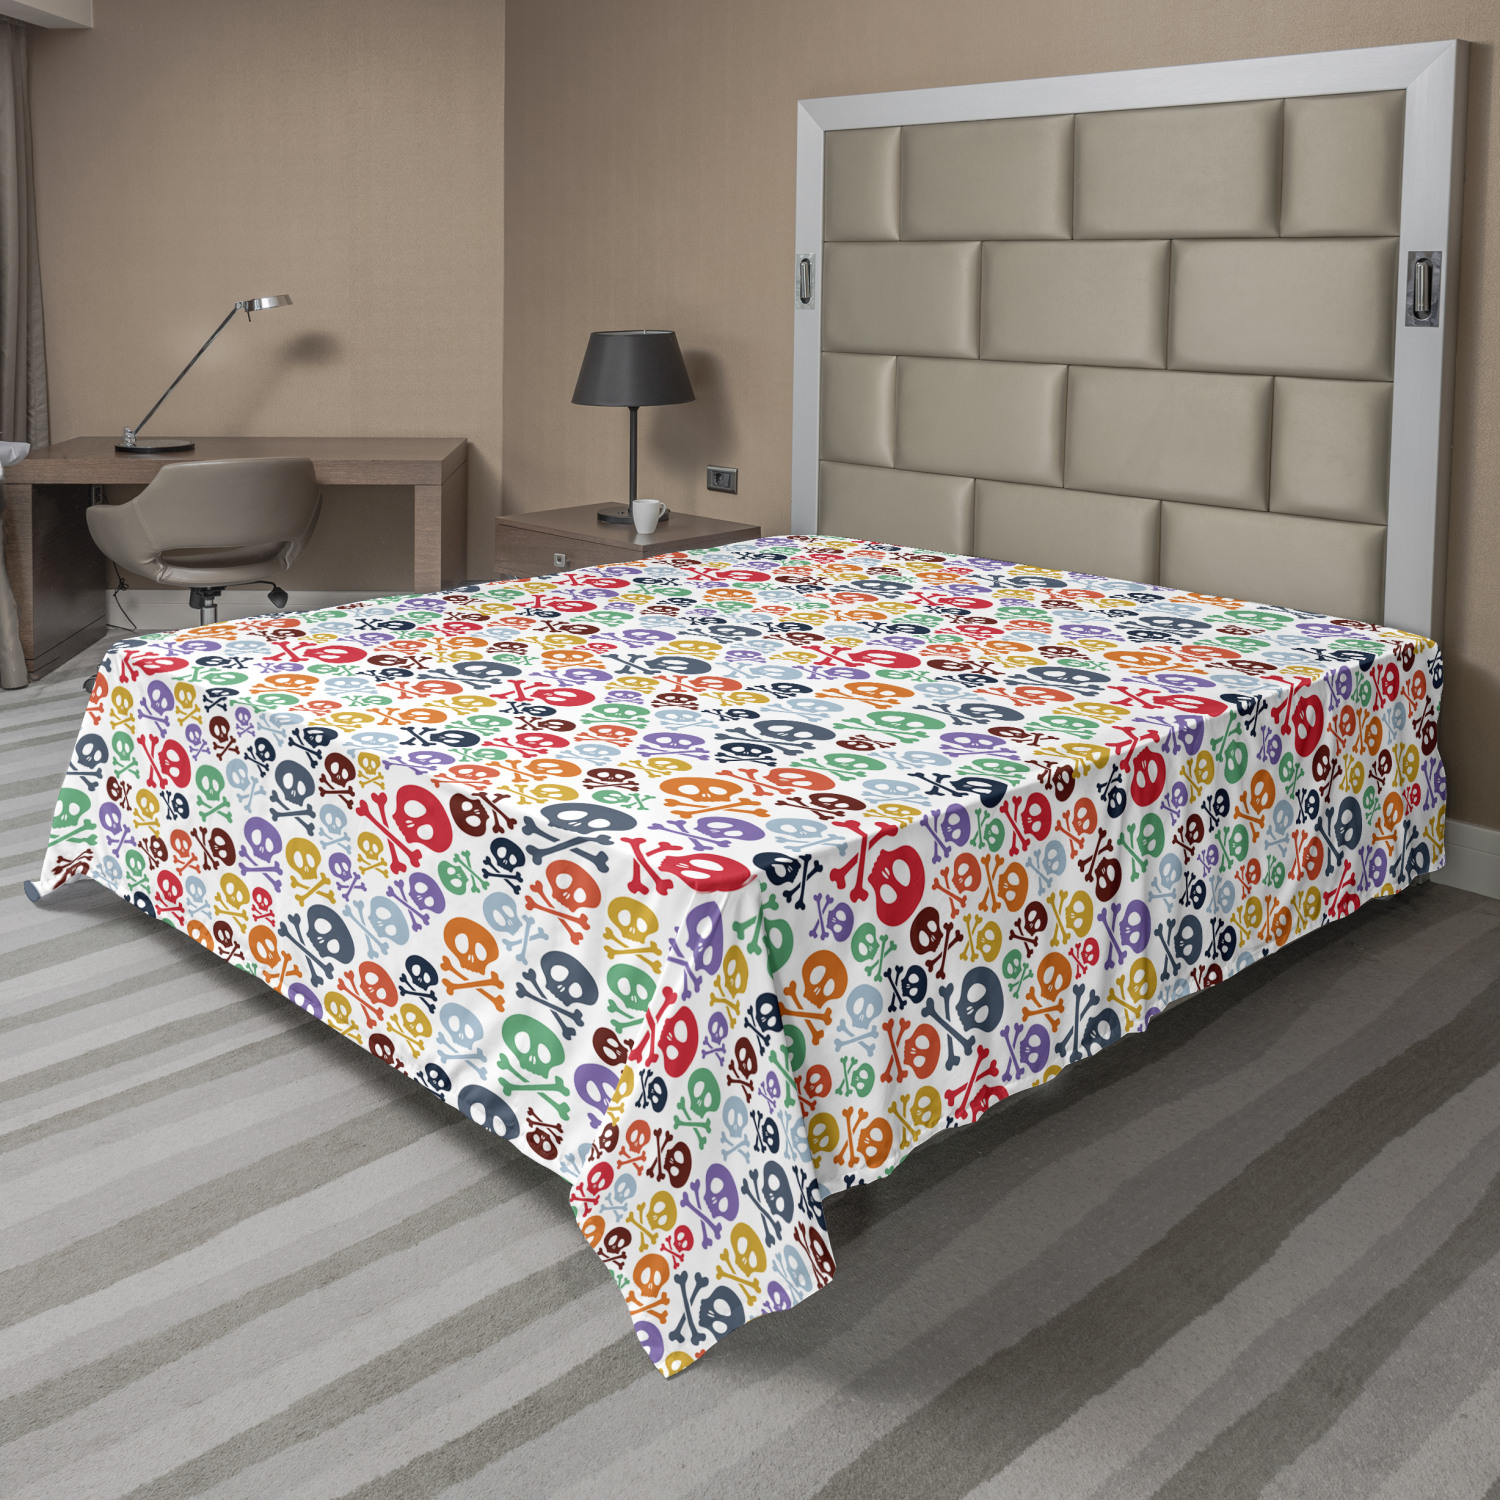 Ambesonne Colorful Print Flat Sheet Top Sheet Decorative Bedding 6 Sizes 